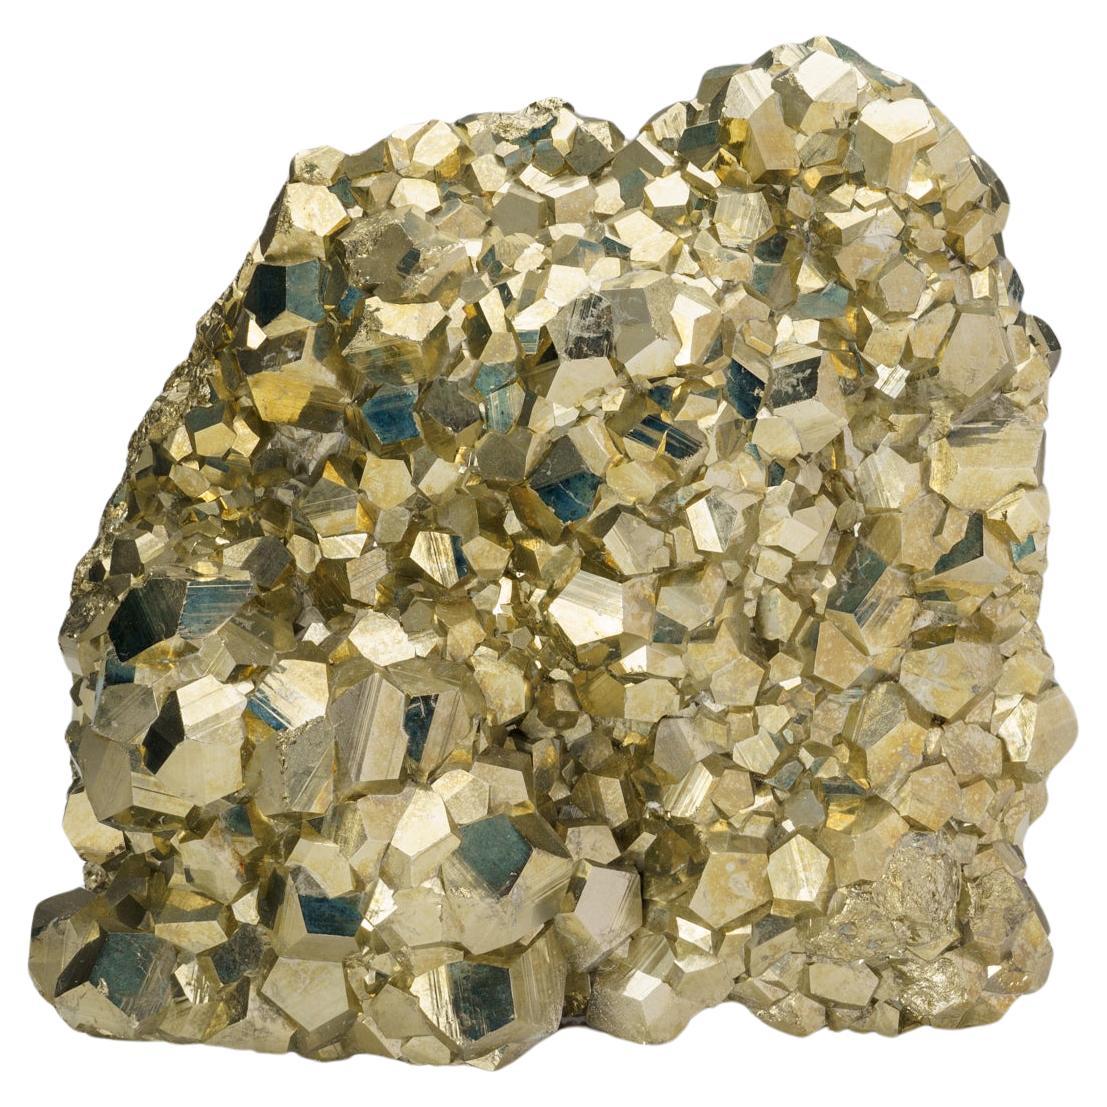 Dodecahedron Pyrite From Quiruvilca District, Santiago de Chuco Province, Peru For Sale